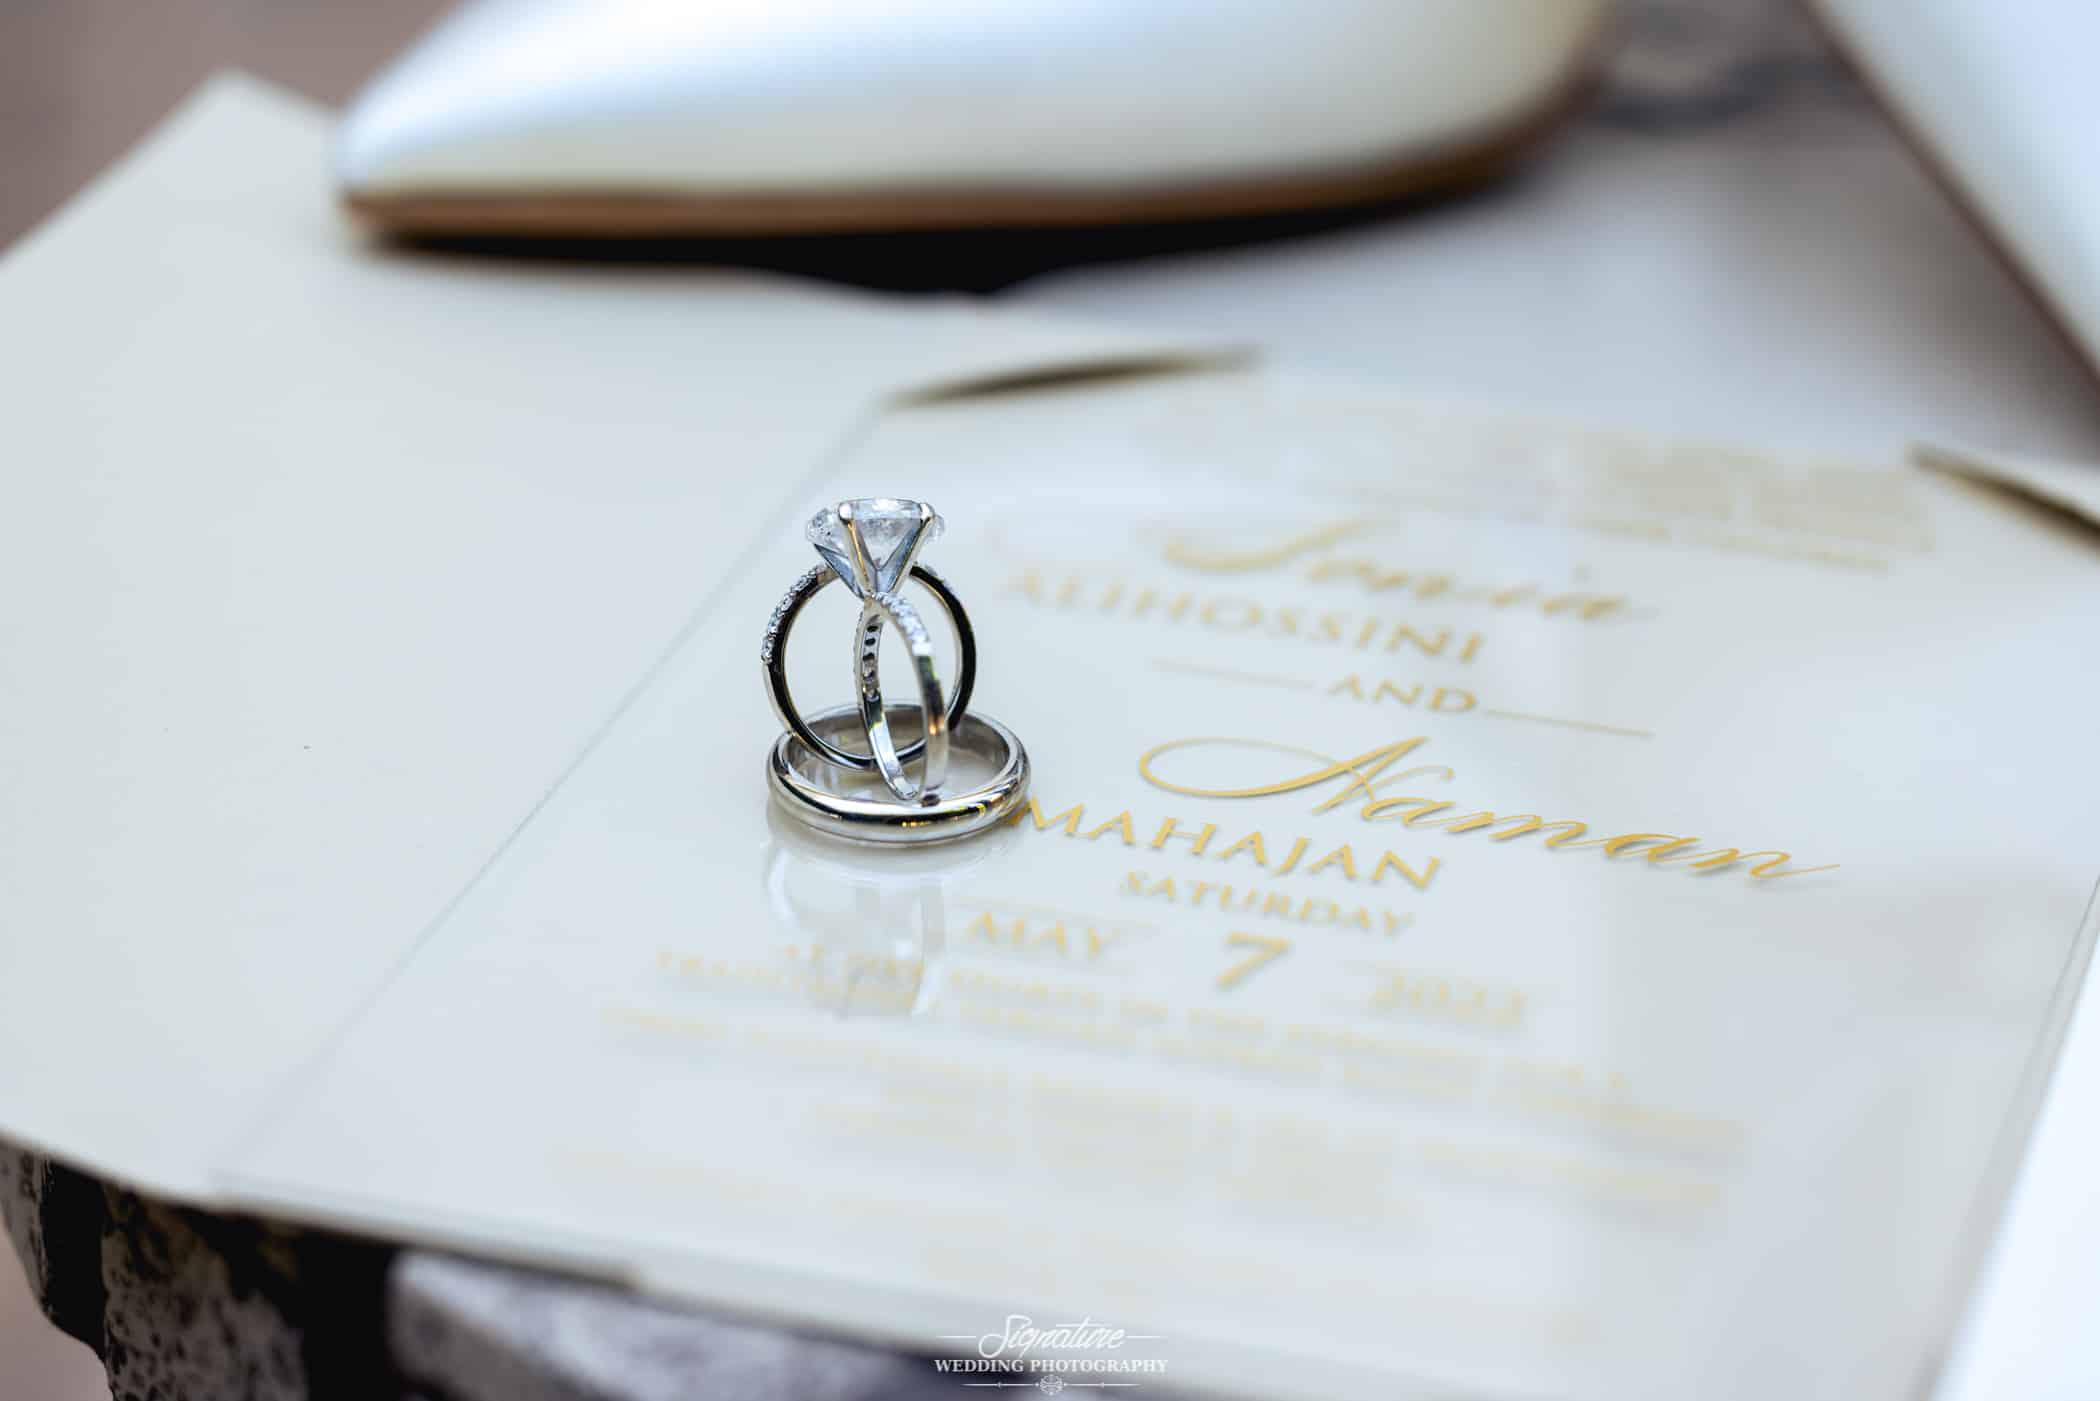 Close up detail shot of wedding rings and invitation